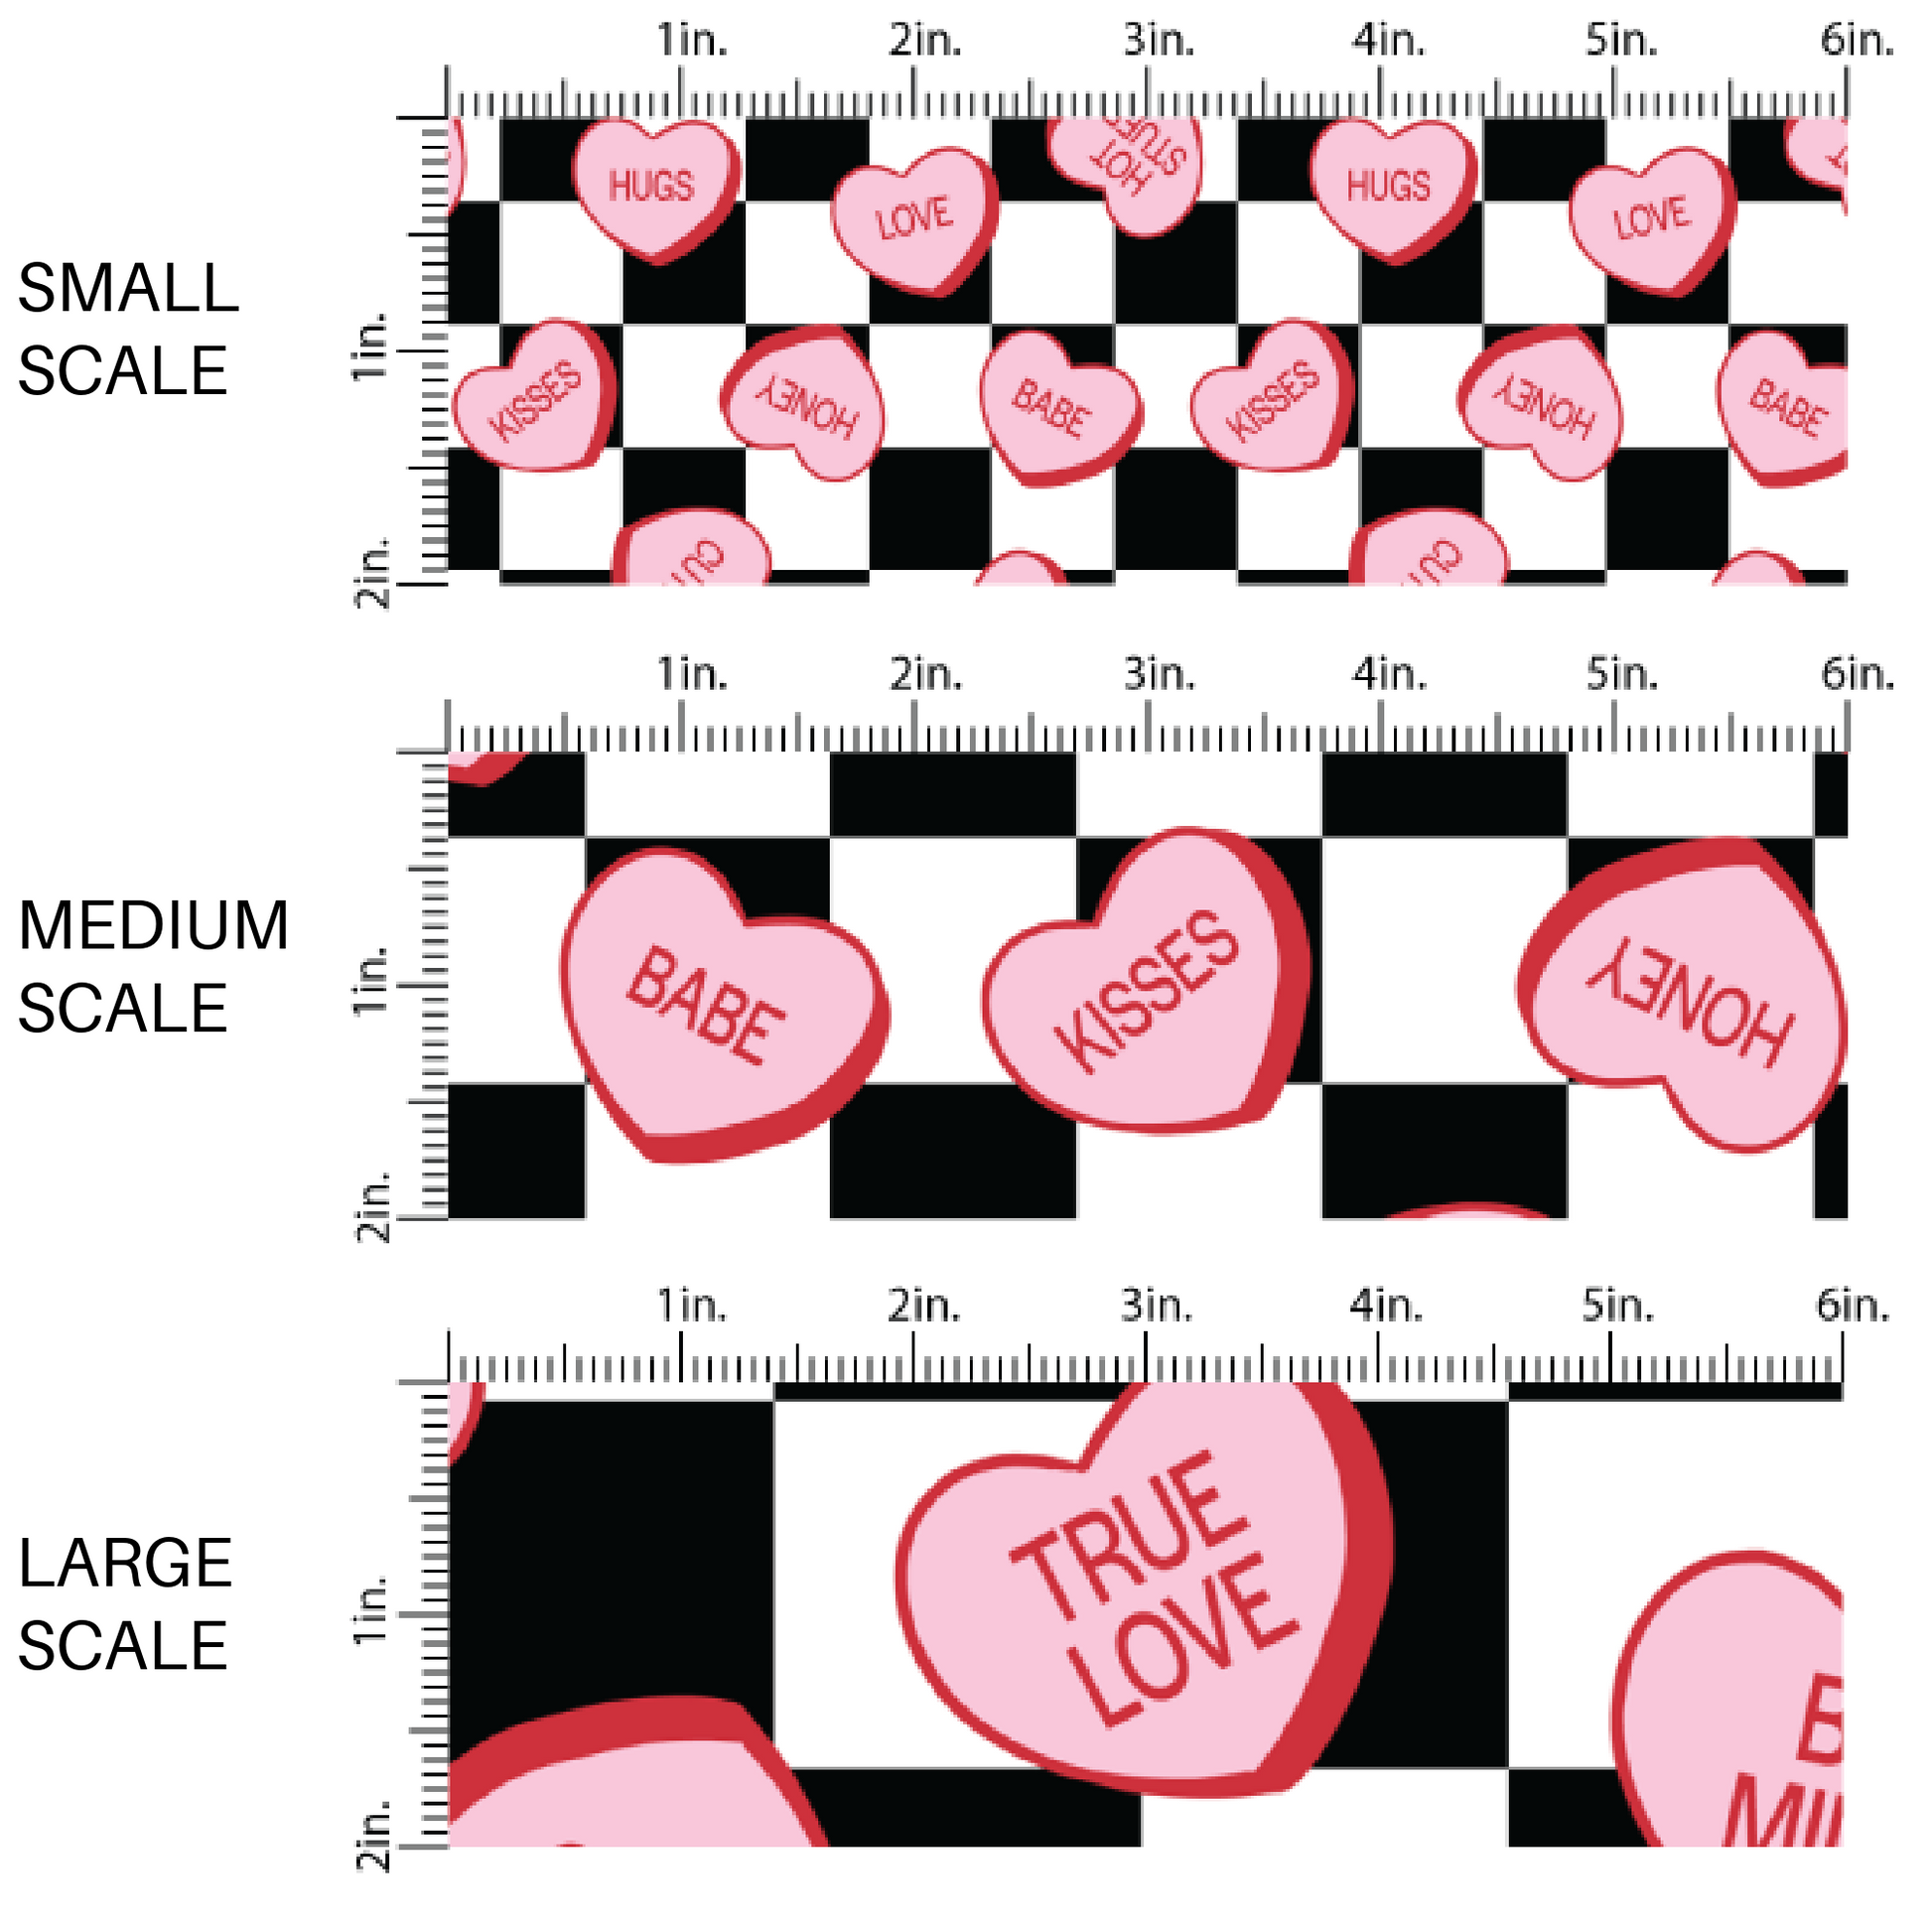 Pink Conversation Heart Candies on Black and White Checkered Fabric by the Yard scaled image guide.